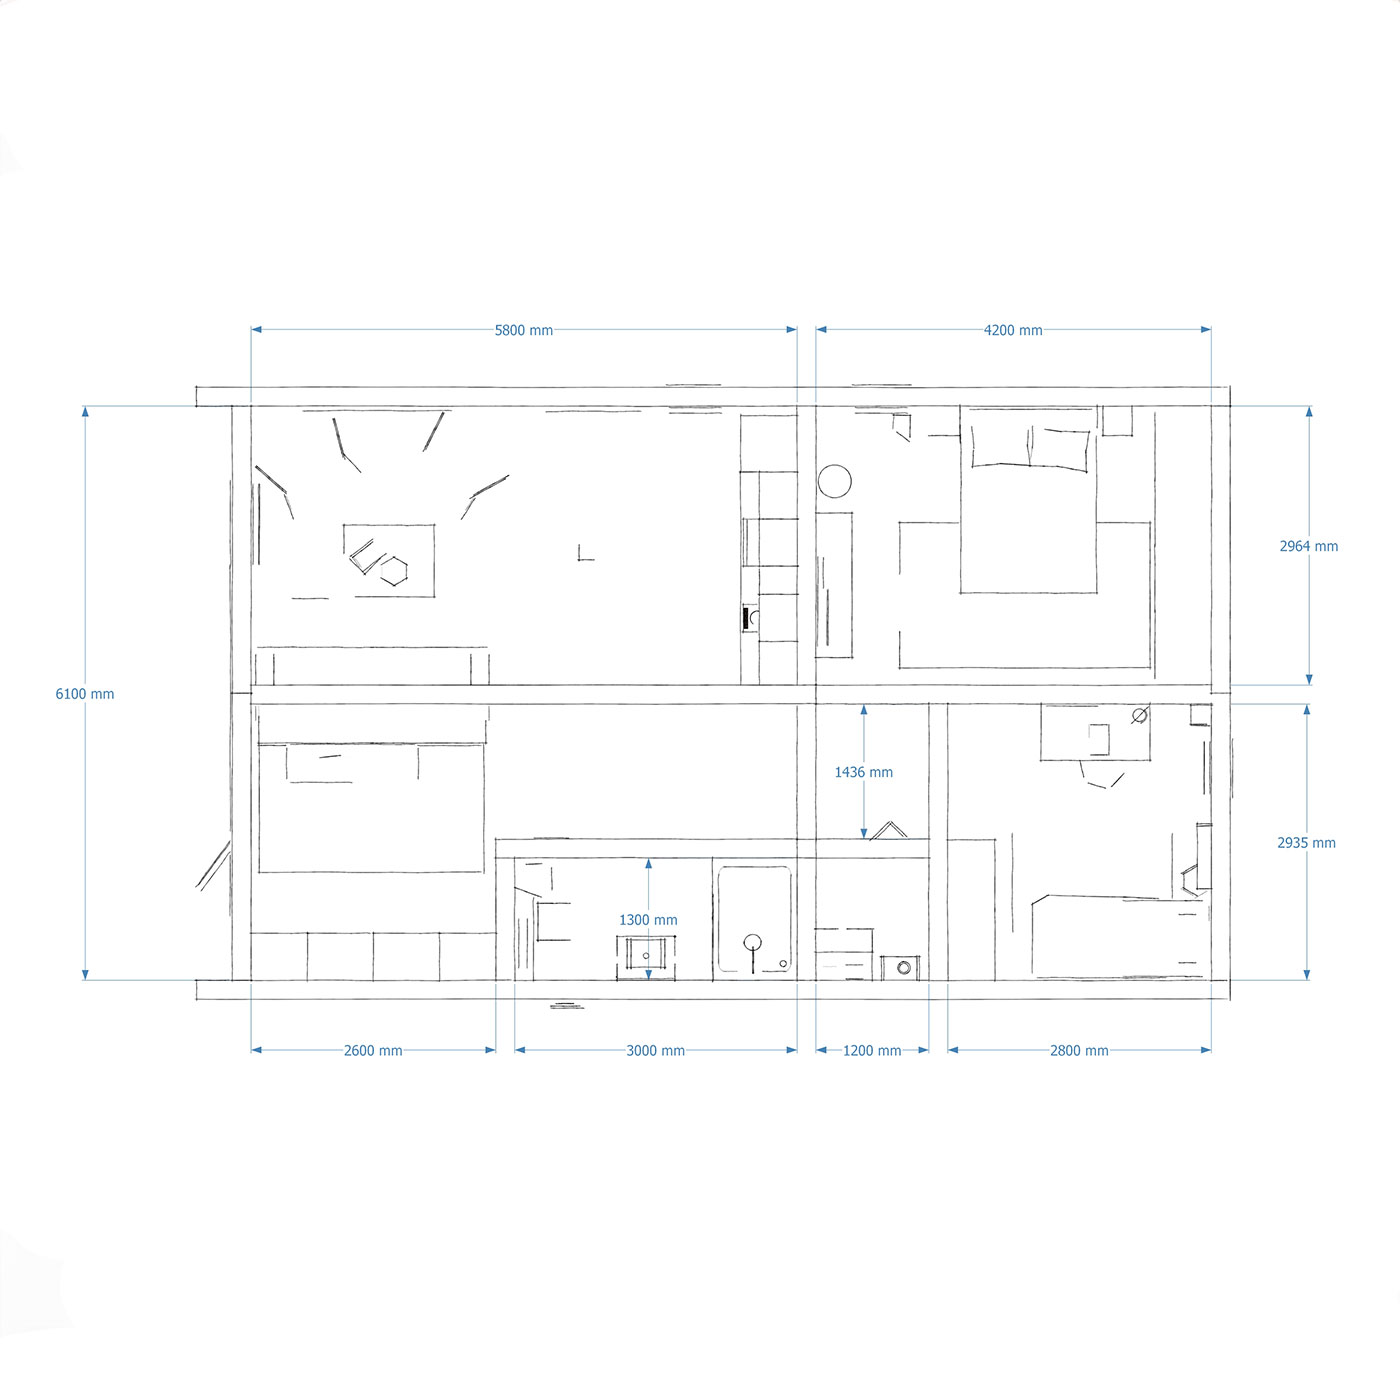 Interior dimensions of 6.5m by 10.9m mobile home